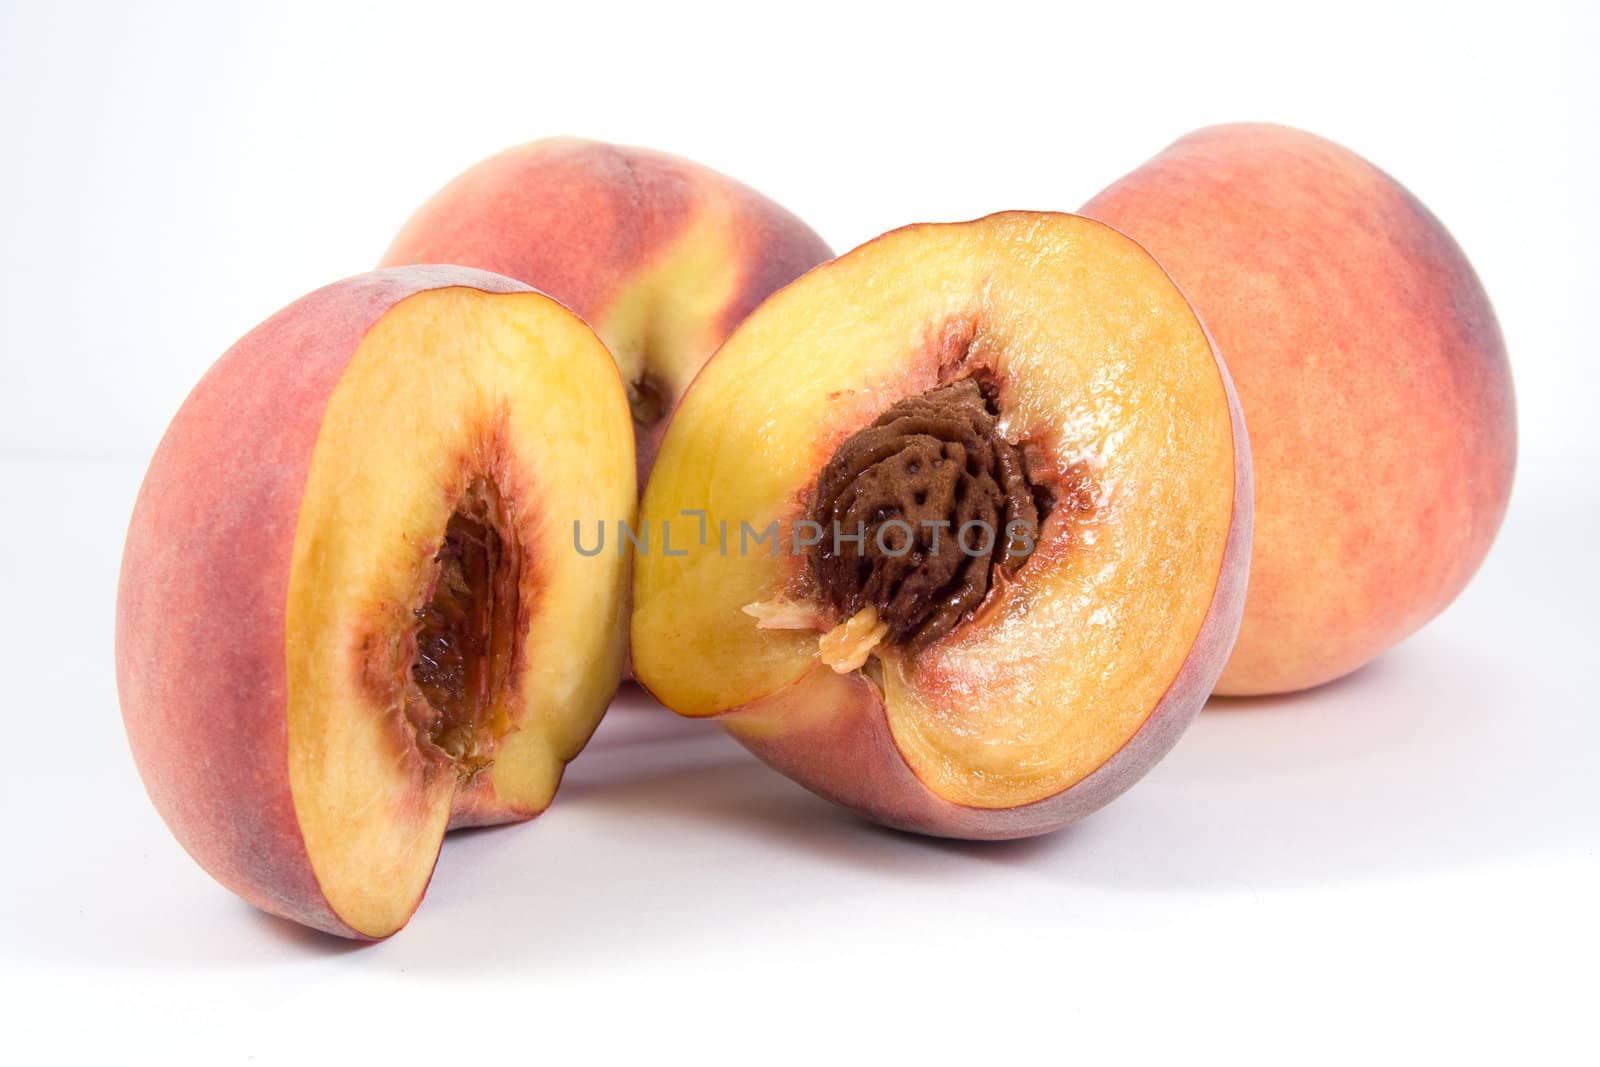 Three juicy peaches. Foreground one is divided in half